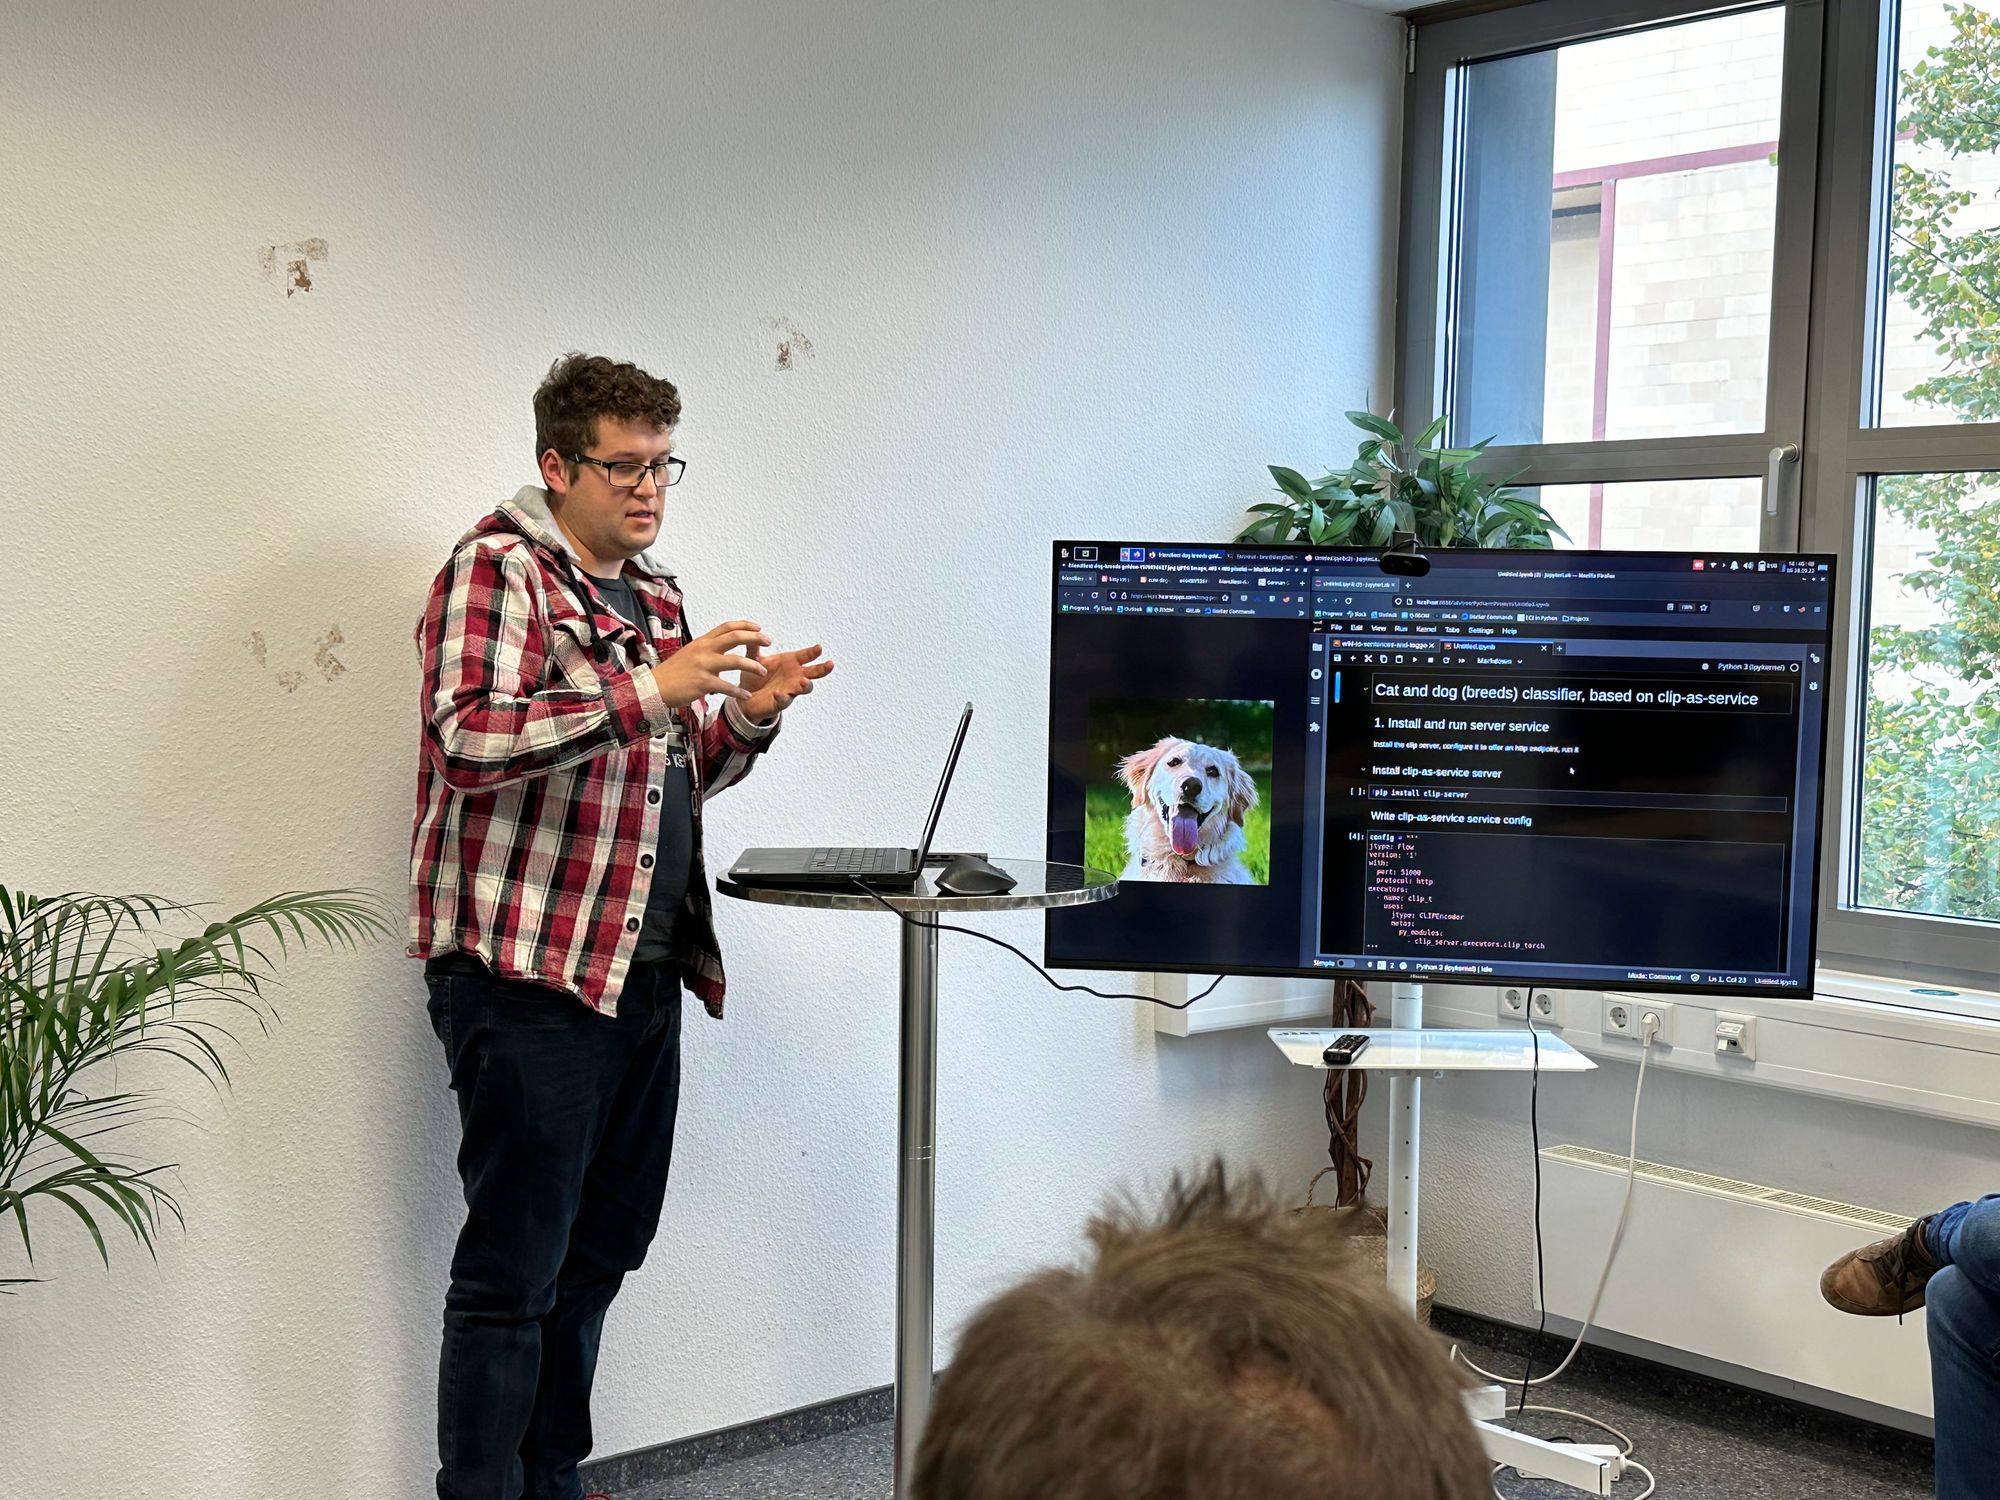 Man in glasses and checkered shirt presenting a cat and dog breeds classifier, with a related code visible on the TV screen